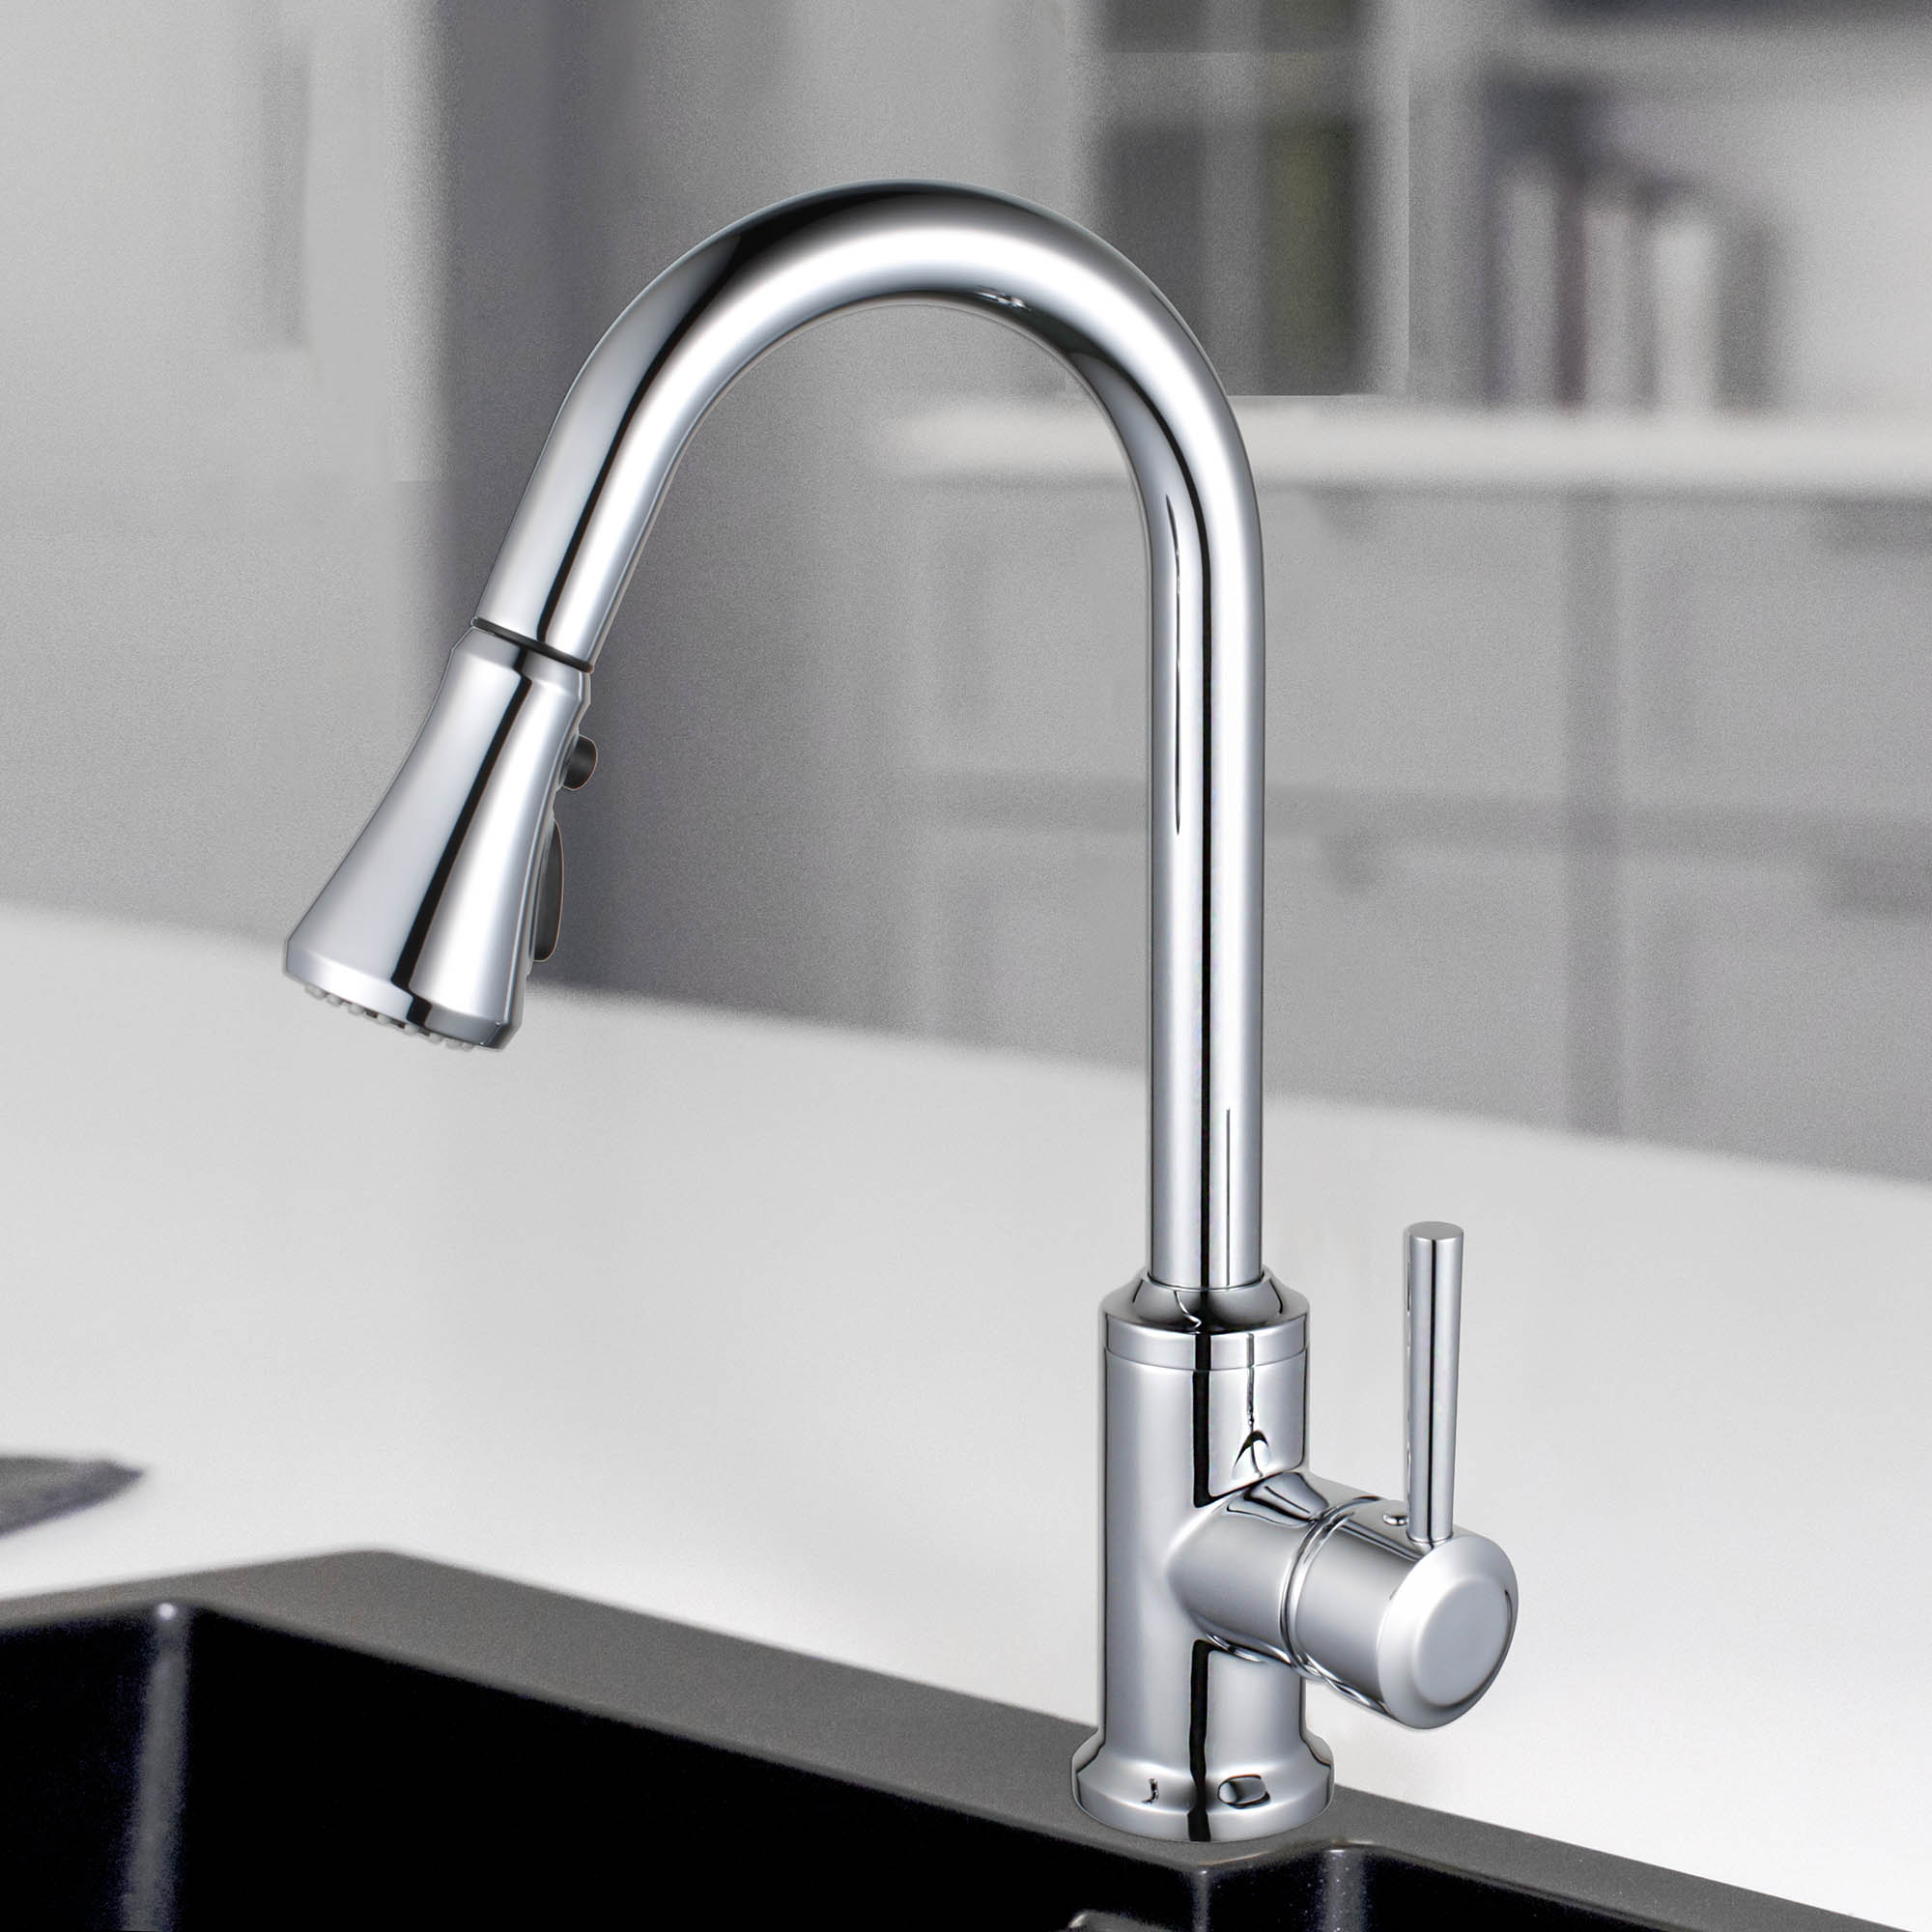 WOODBRIDGE WK101201CH Stainless Steel Single Handle Pull Down Kitchen Faucet in Chrome Finish.